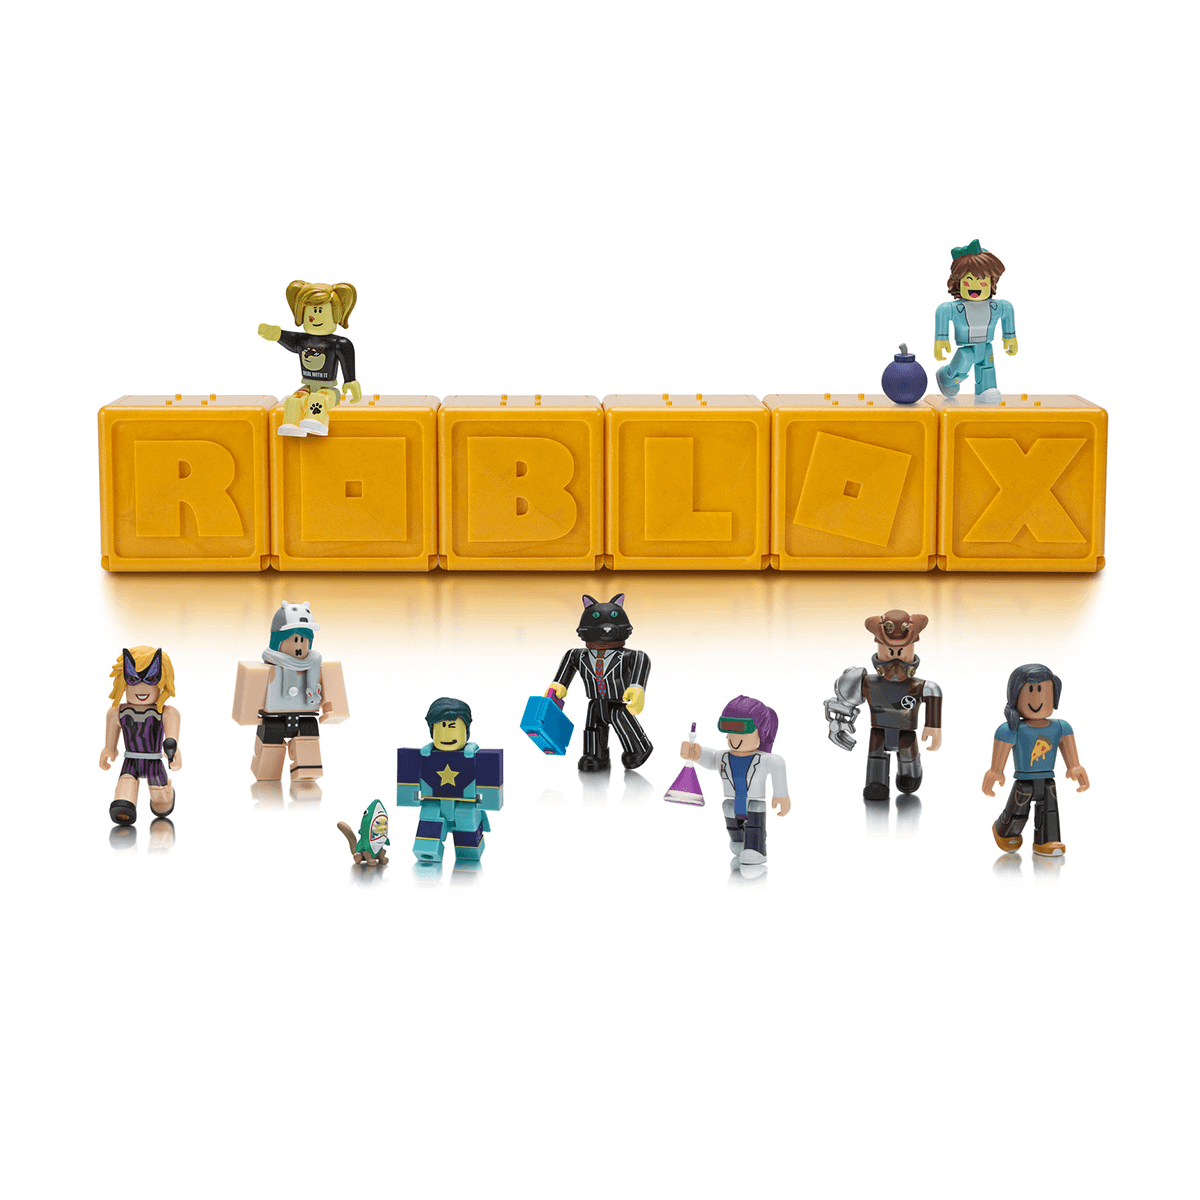 Roblox Celebrity Series 1 Mystery Figure Surprise Pack - roblox runway model toys games bricks figurines on